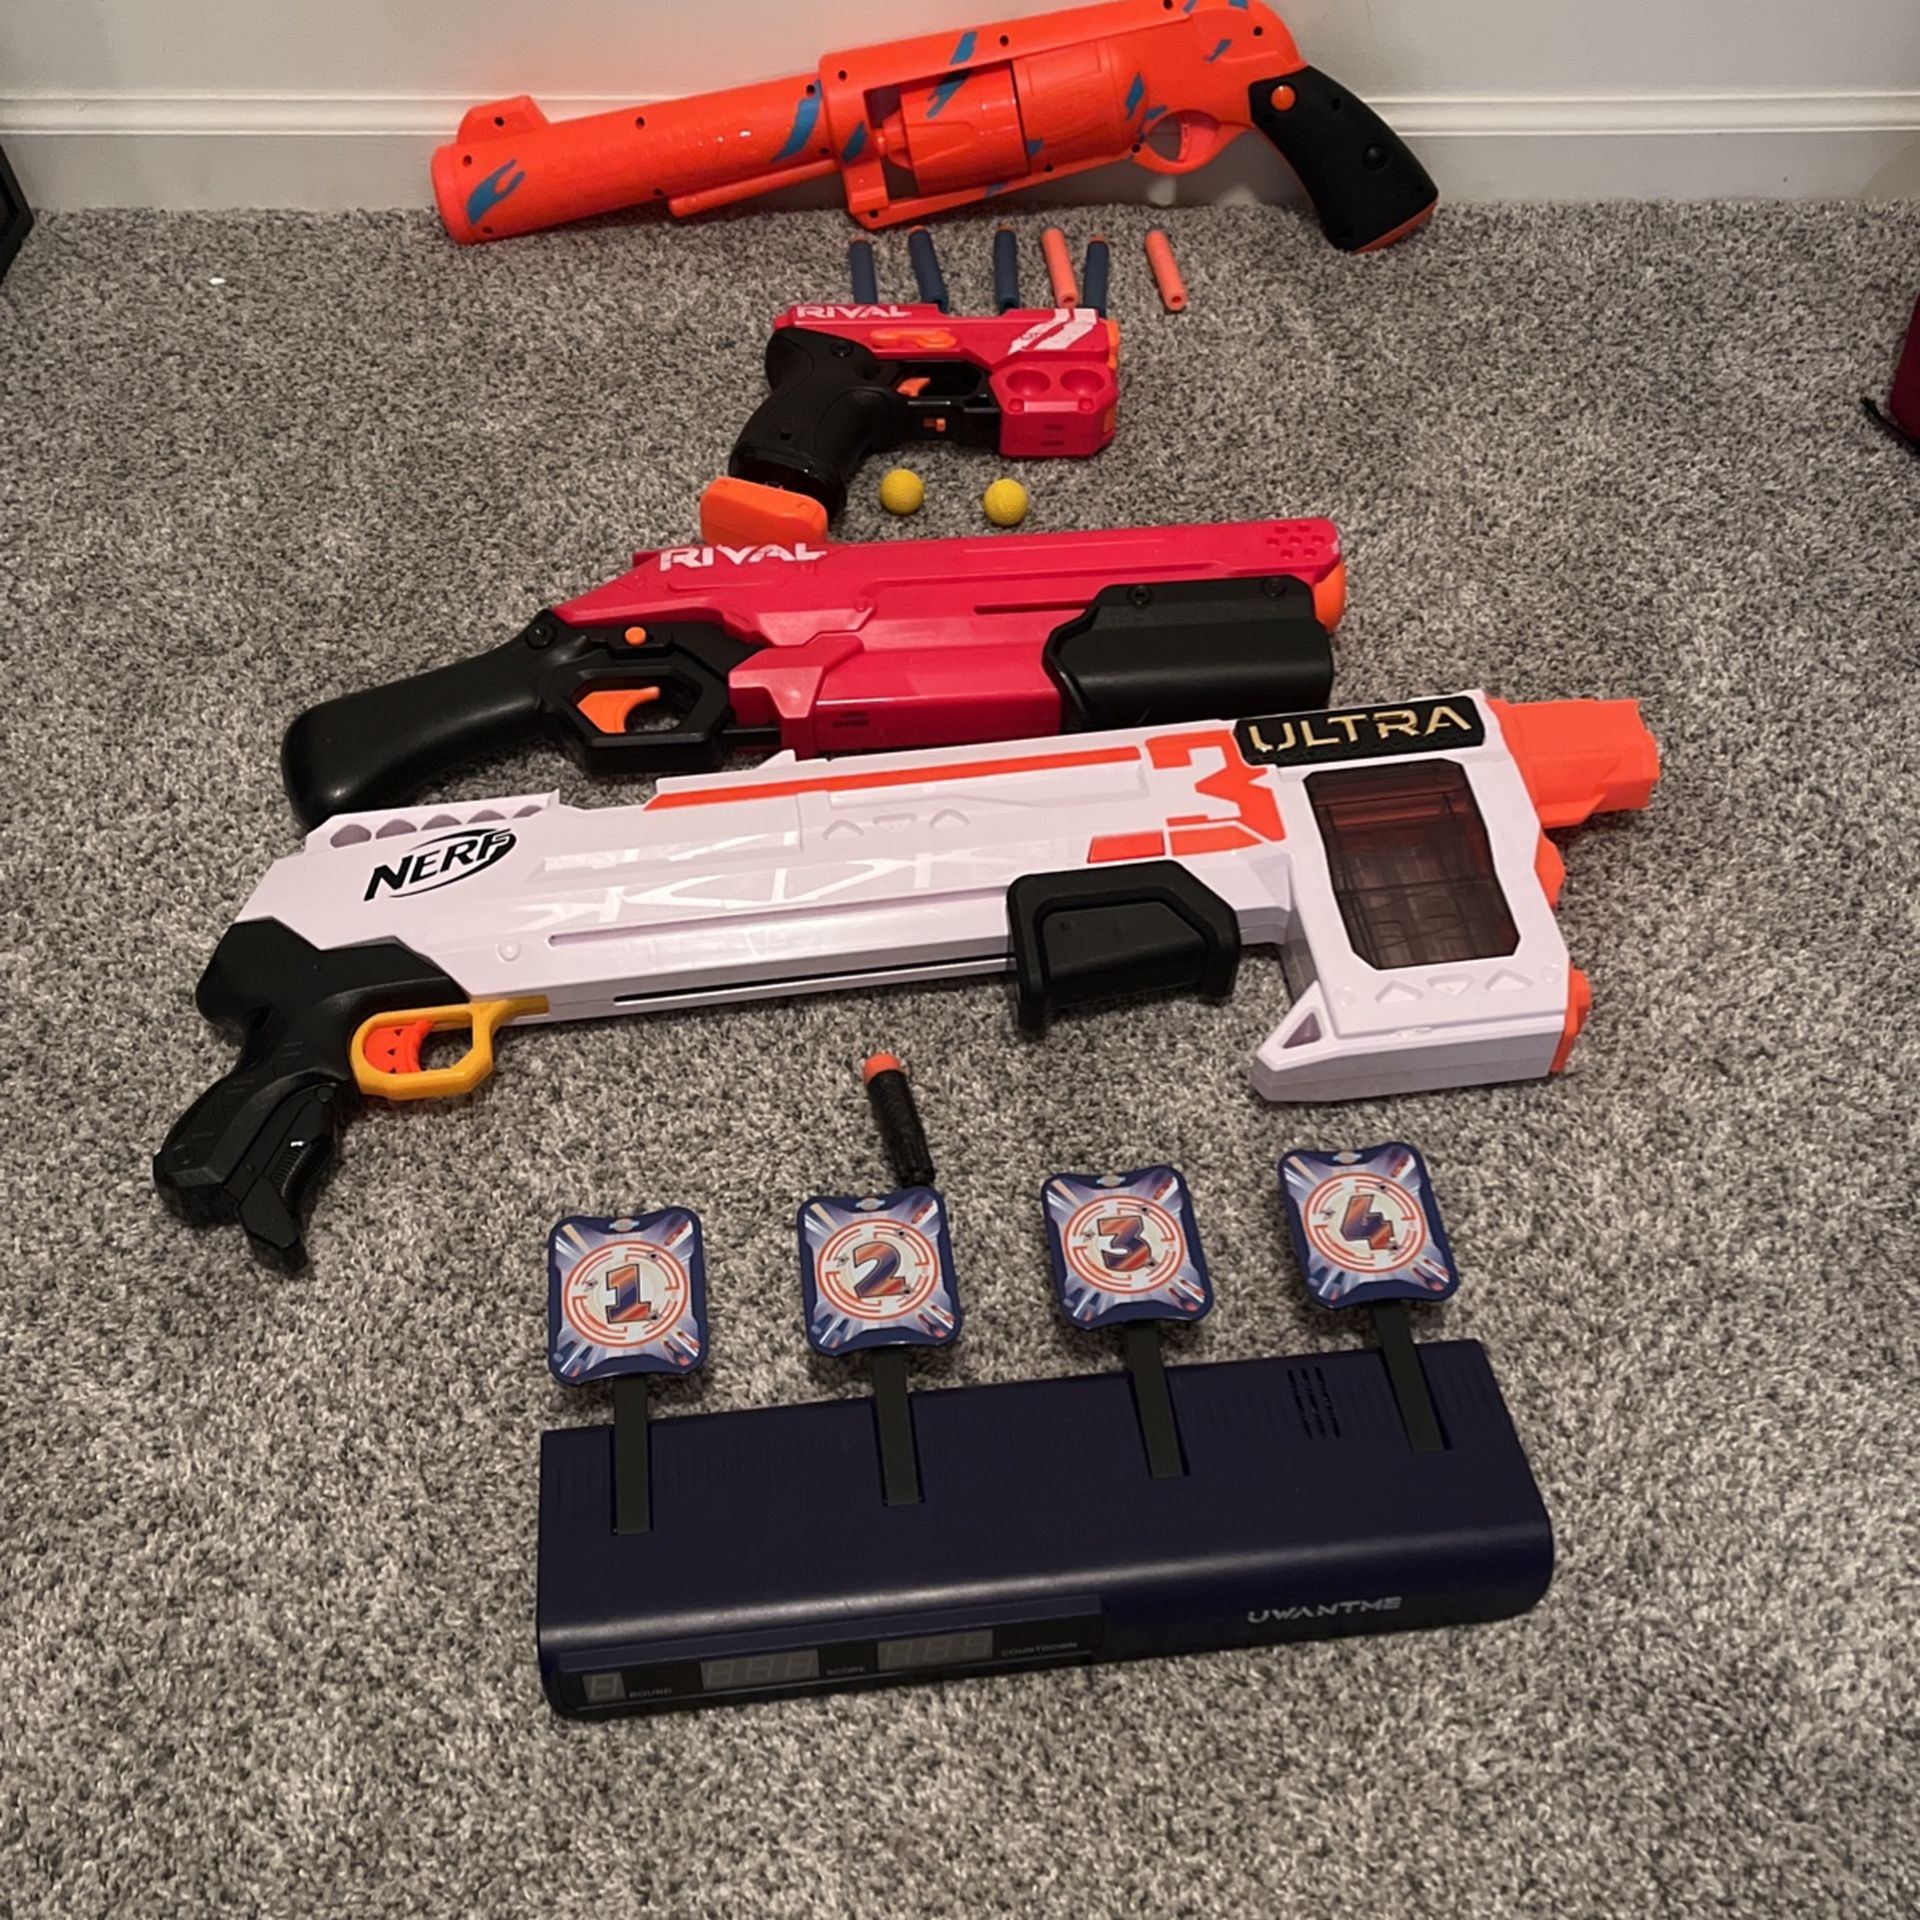 4 Nerf Guns For Cheap Including A Target Practice Thing. (see Description)